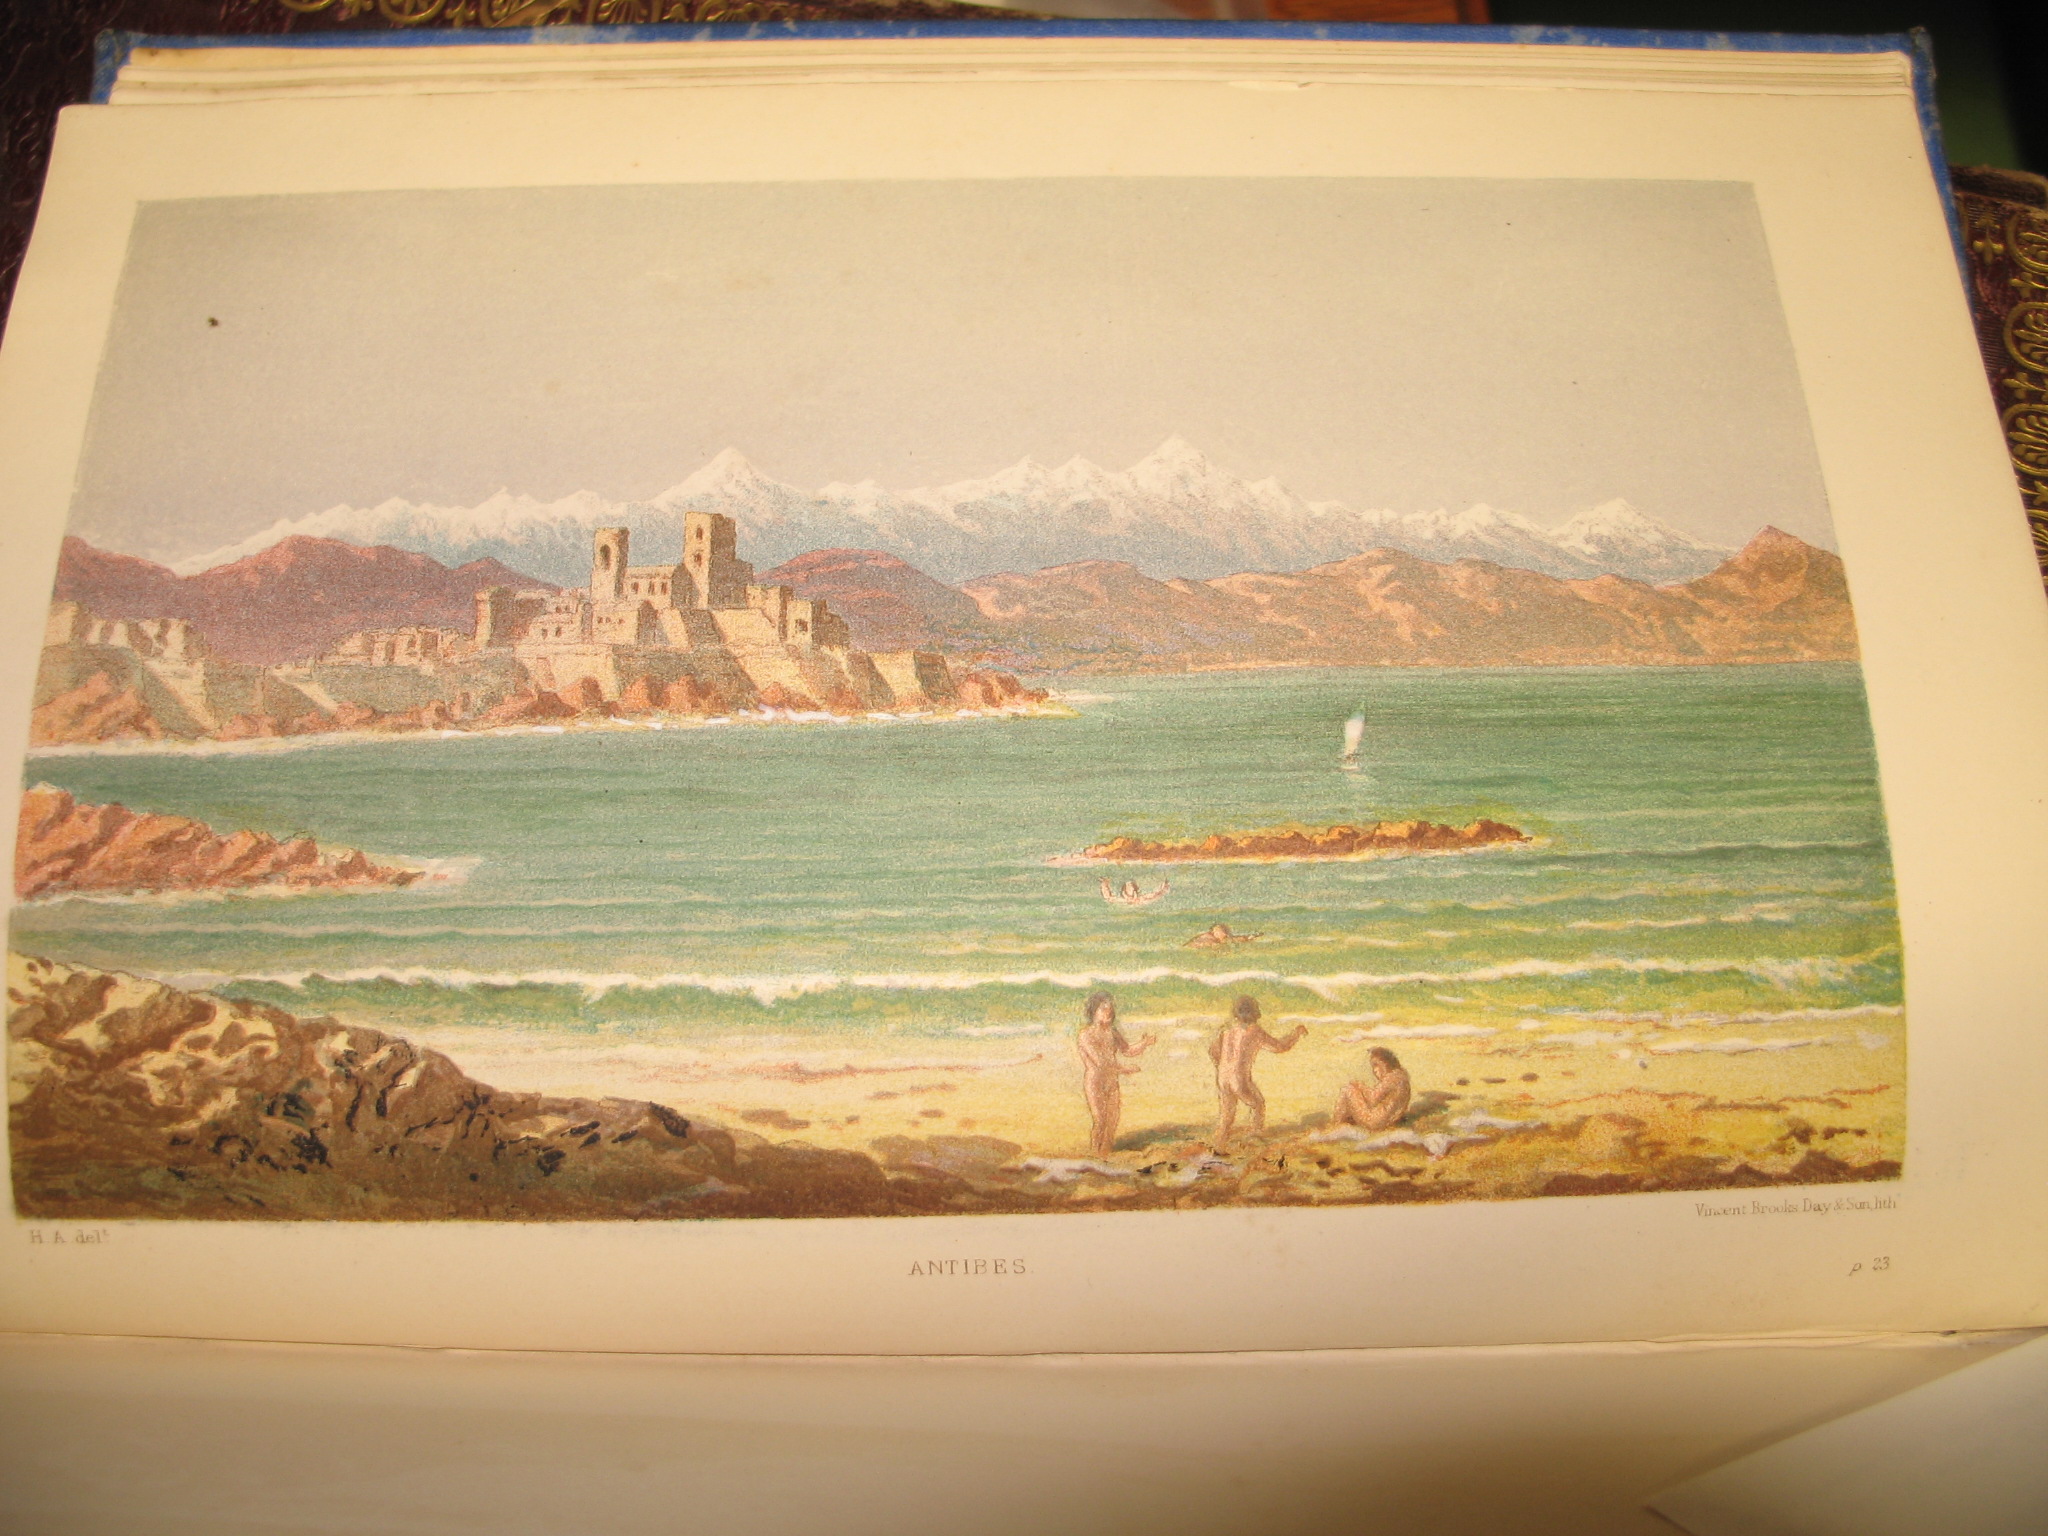 ALFORD (H.) The RIVIERA... from Cannes to Genoa, 4to, 12 chromo plates, text illus., cloth gilt by